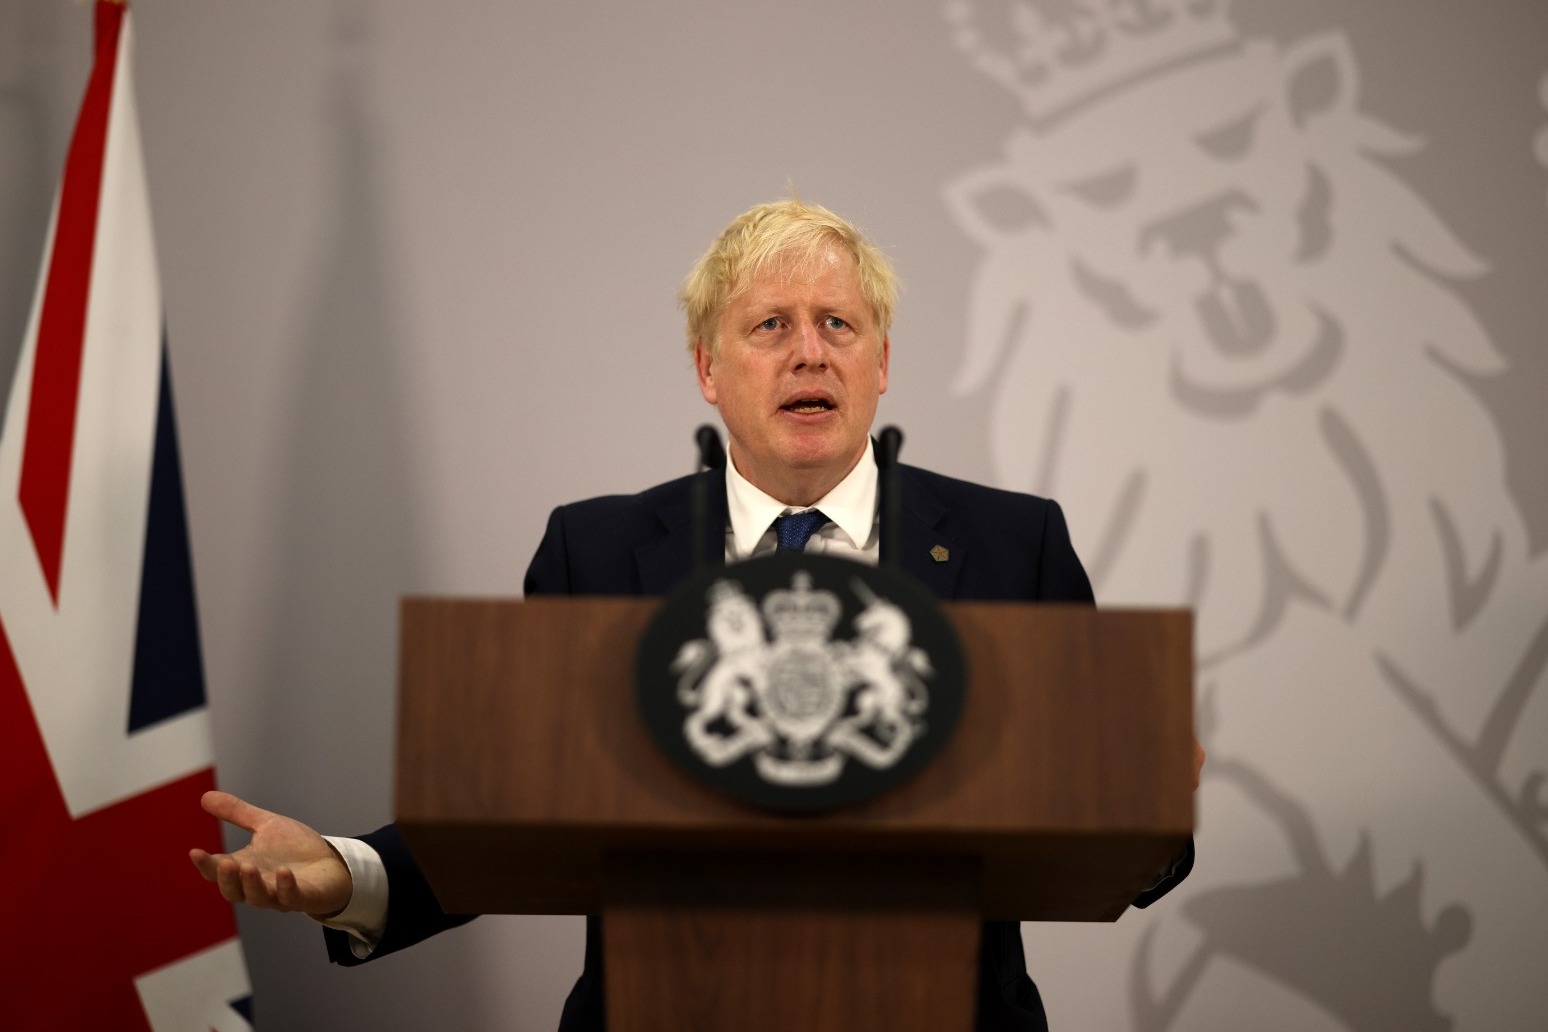 ‘Game over’ for Boris Johnson as papers react to Cabinet resignations 